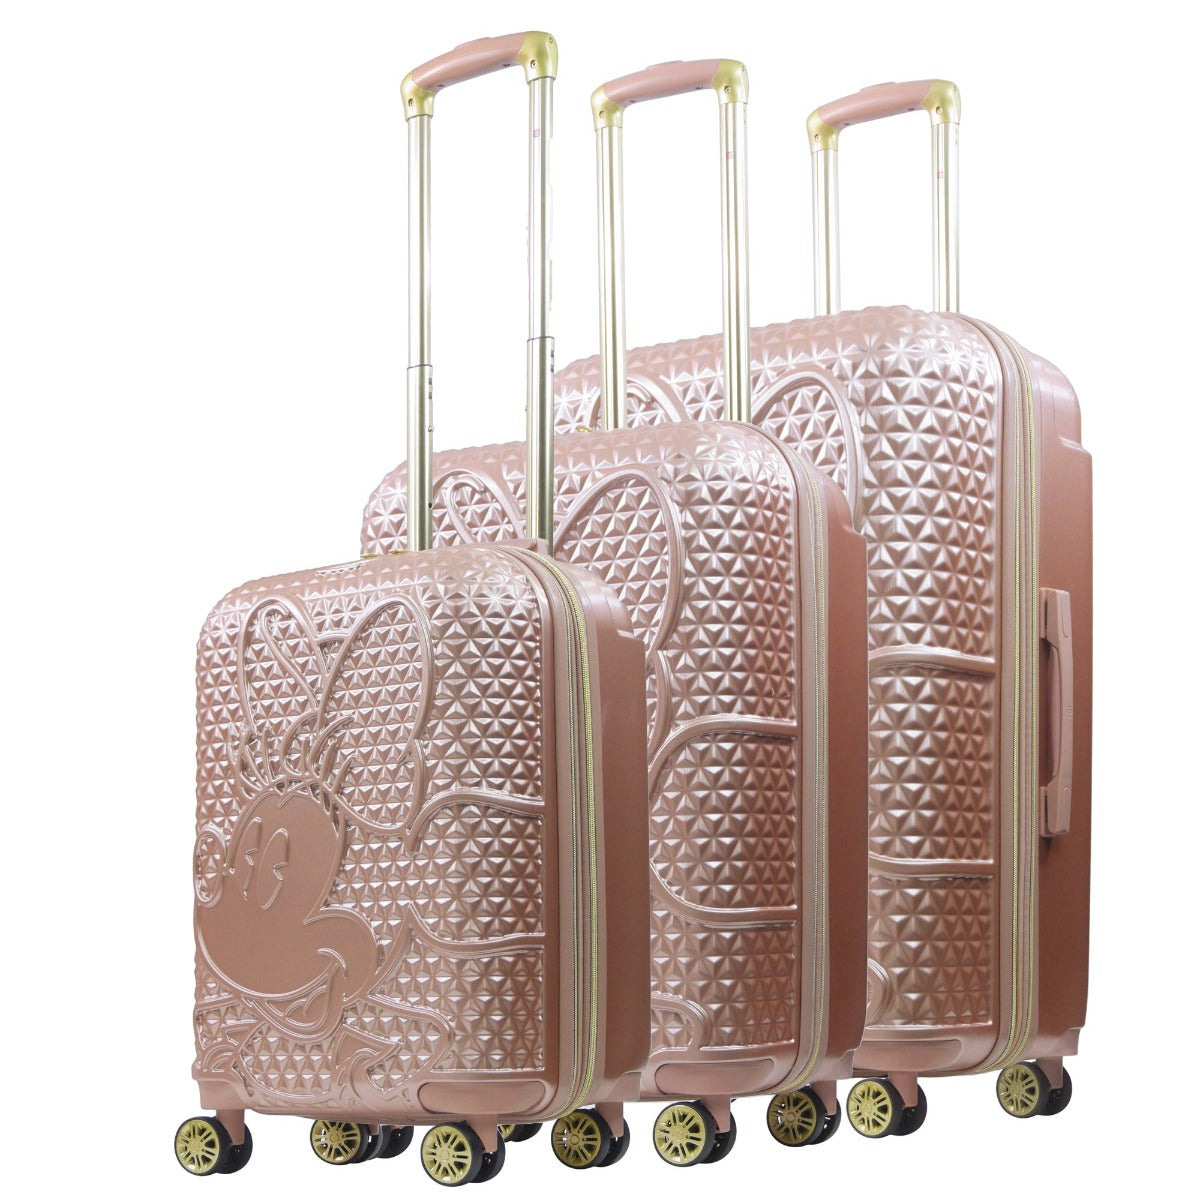 Ful Disney Minnie Mouse rolling luggage 3 piece set rose gold - best traveling suitcase sets